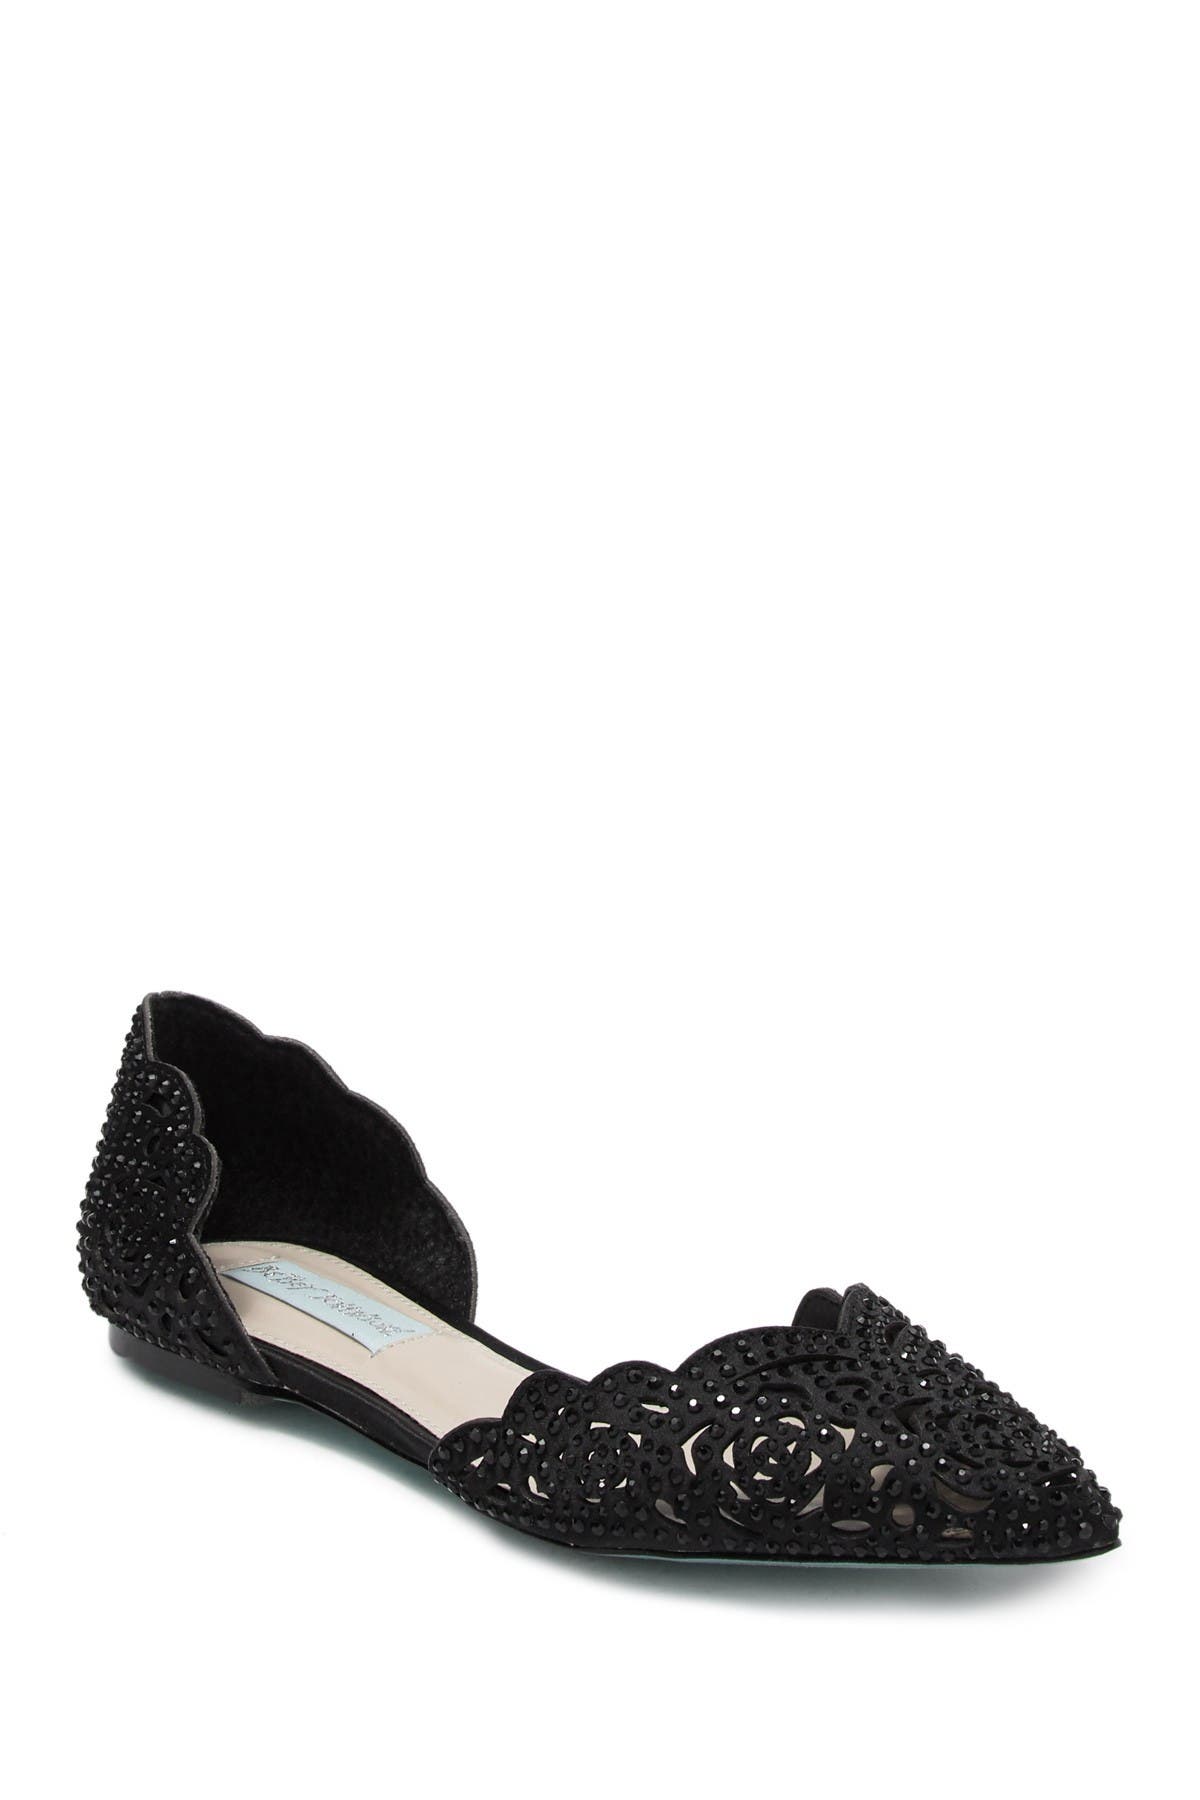 betsey johnson lucy